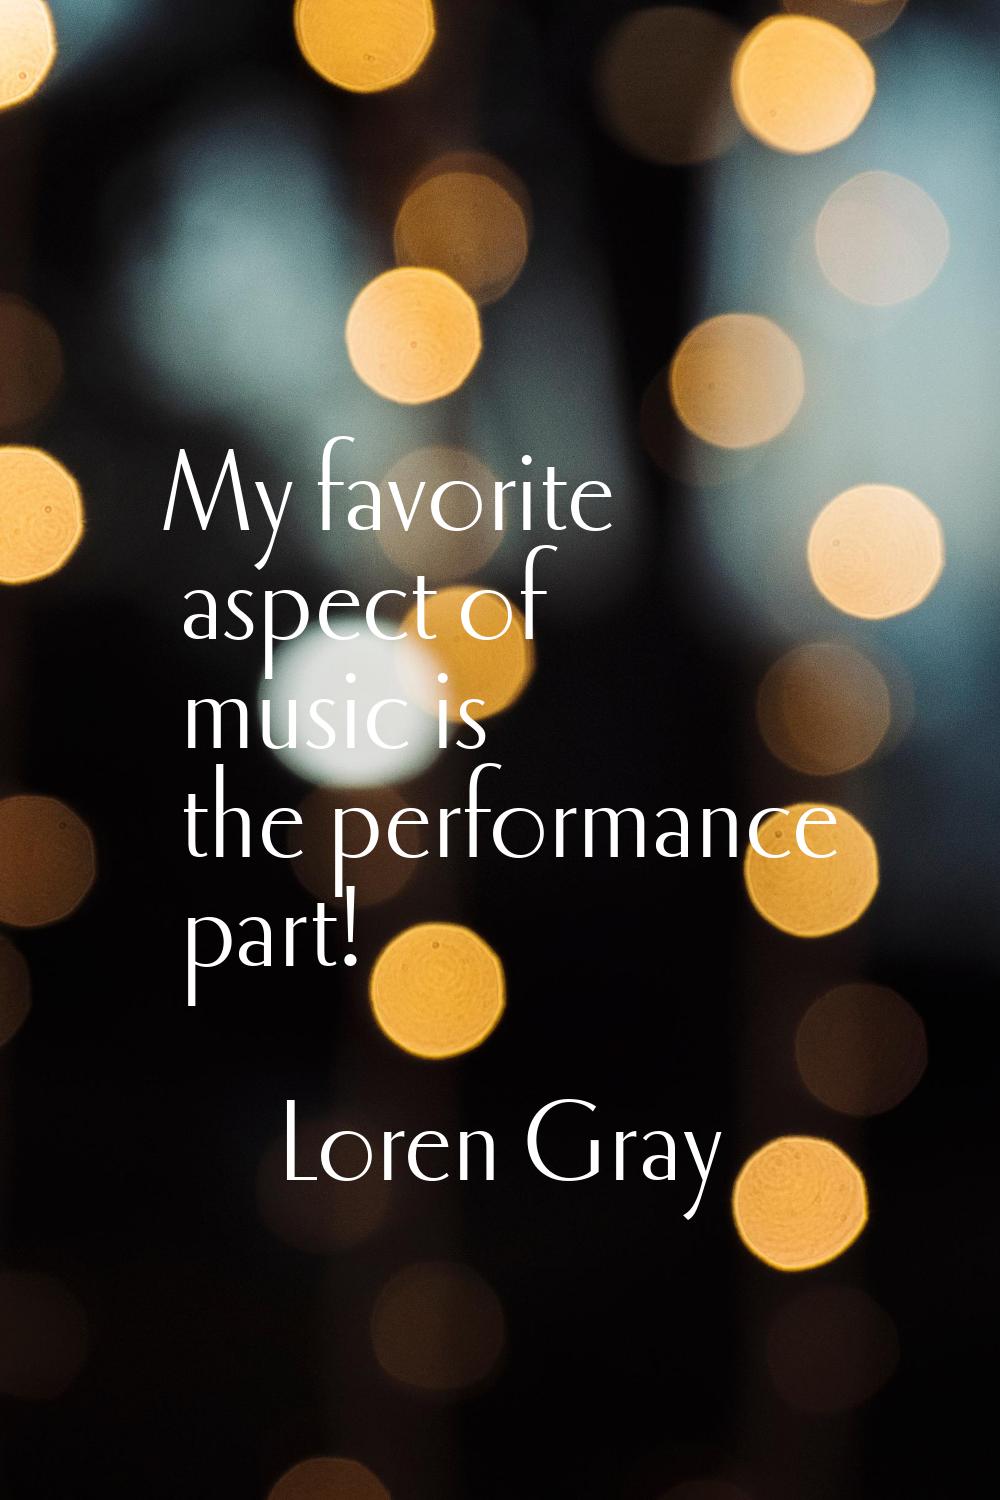 My favorite aspect of music is the performance part!